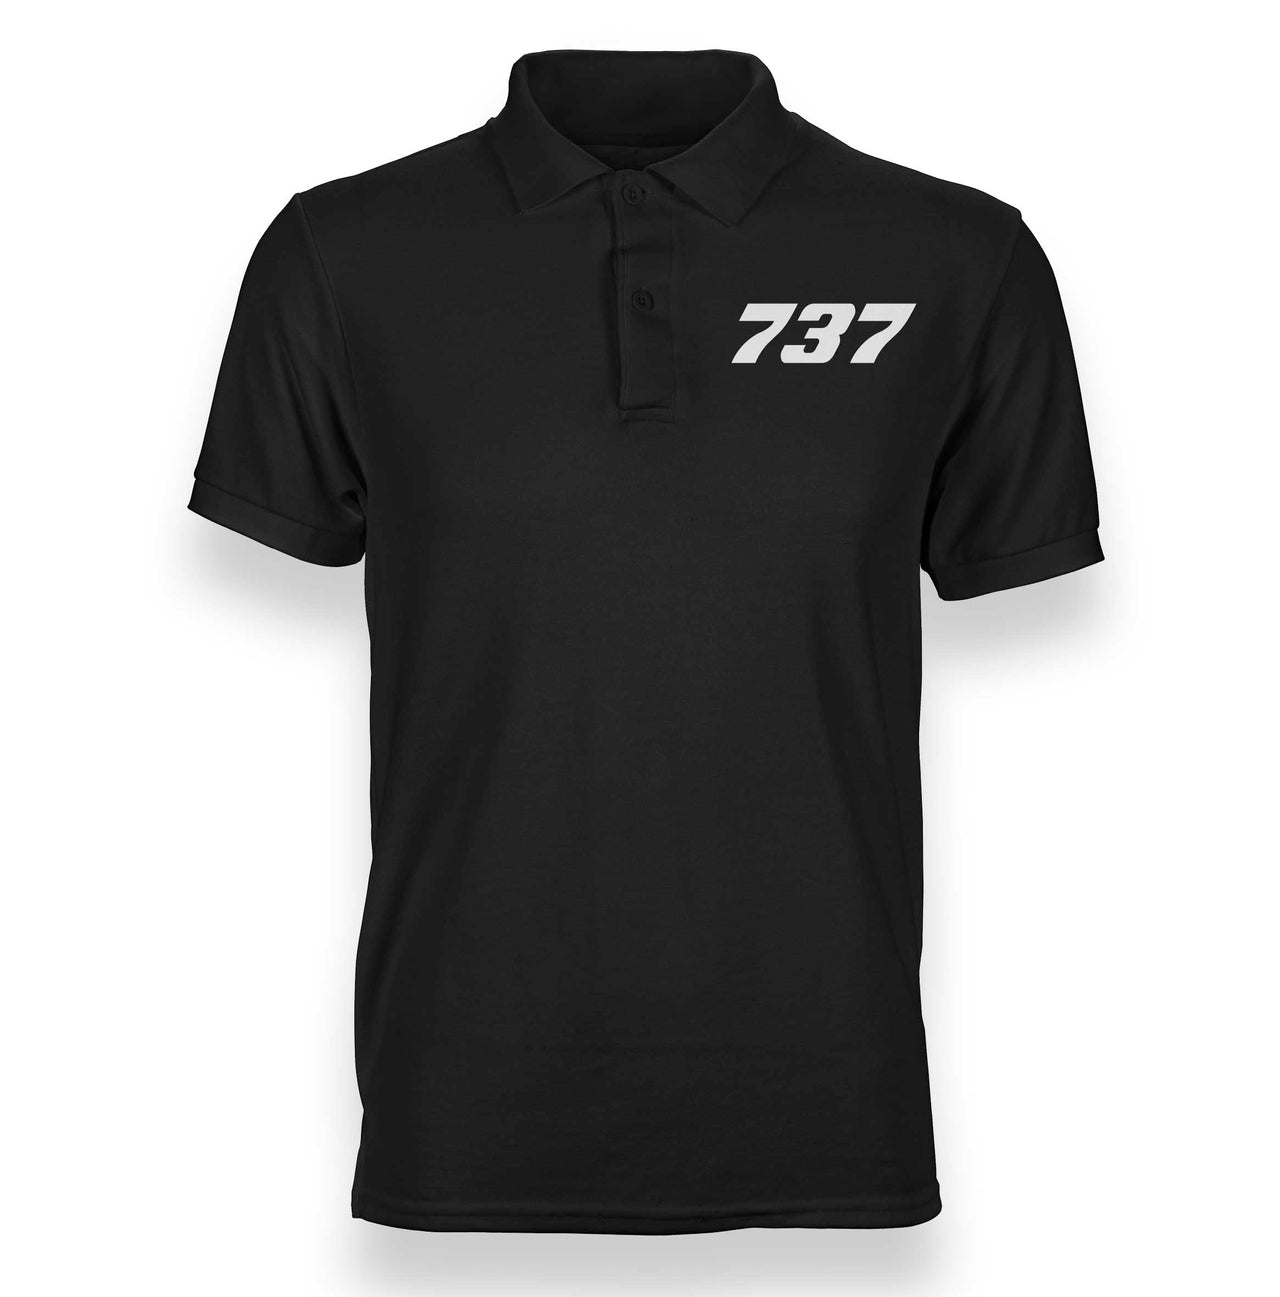 Boeing 737 Flat Text Designed Polo T-Shirts